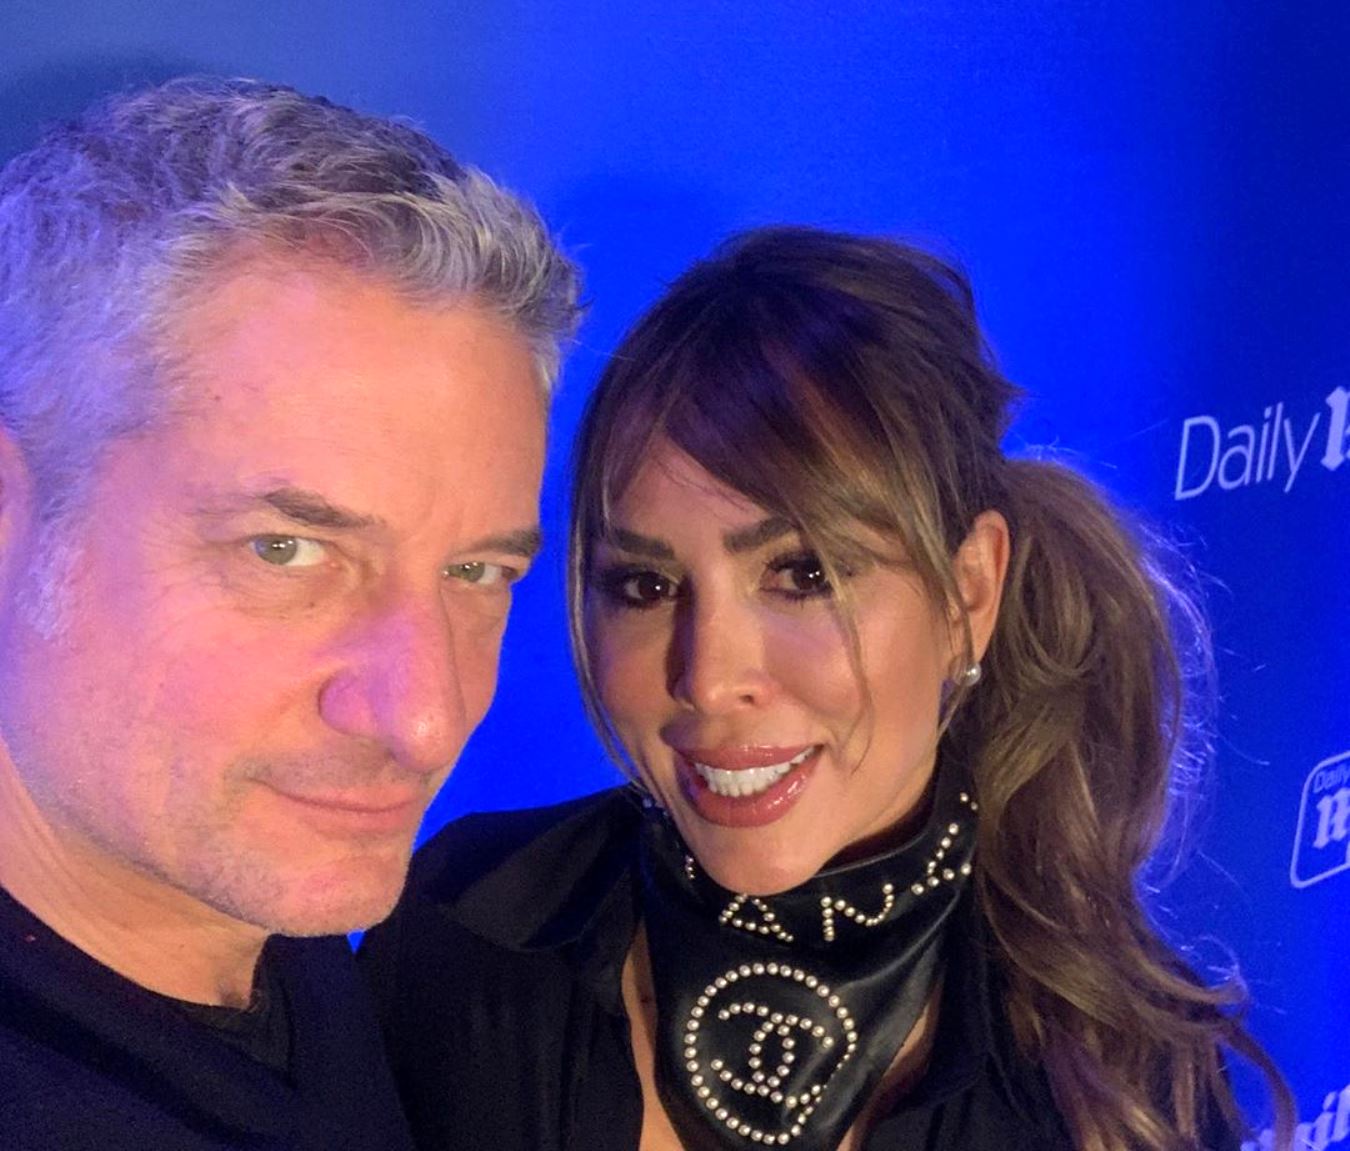 PHOTOS: Kelly Dodd's Fiancé Rick Leventhal Lists NYC Apartment For $825,000 as RHOC Star Says "He Belongs With Me in California"